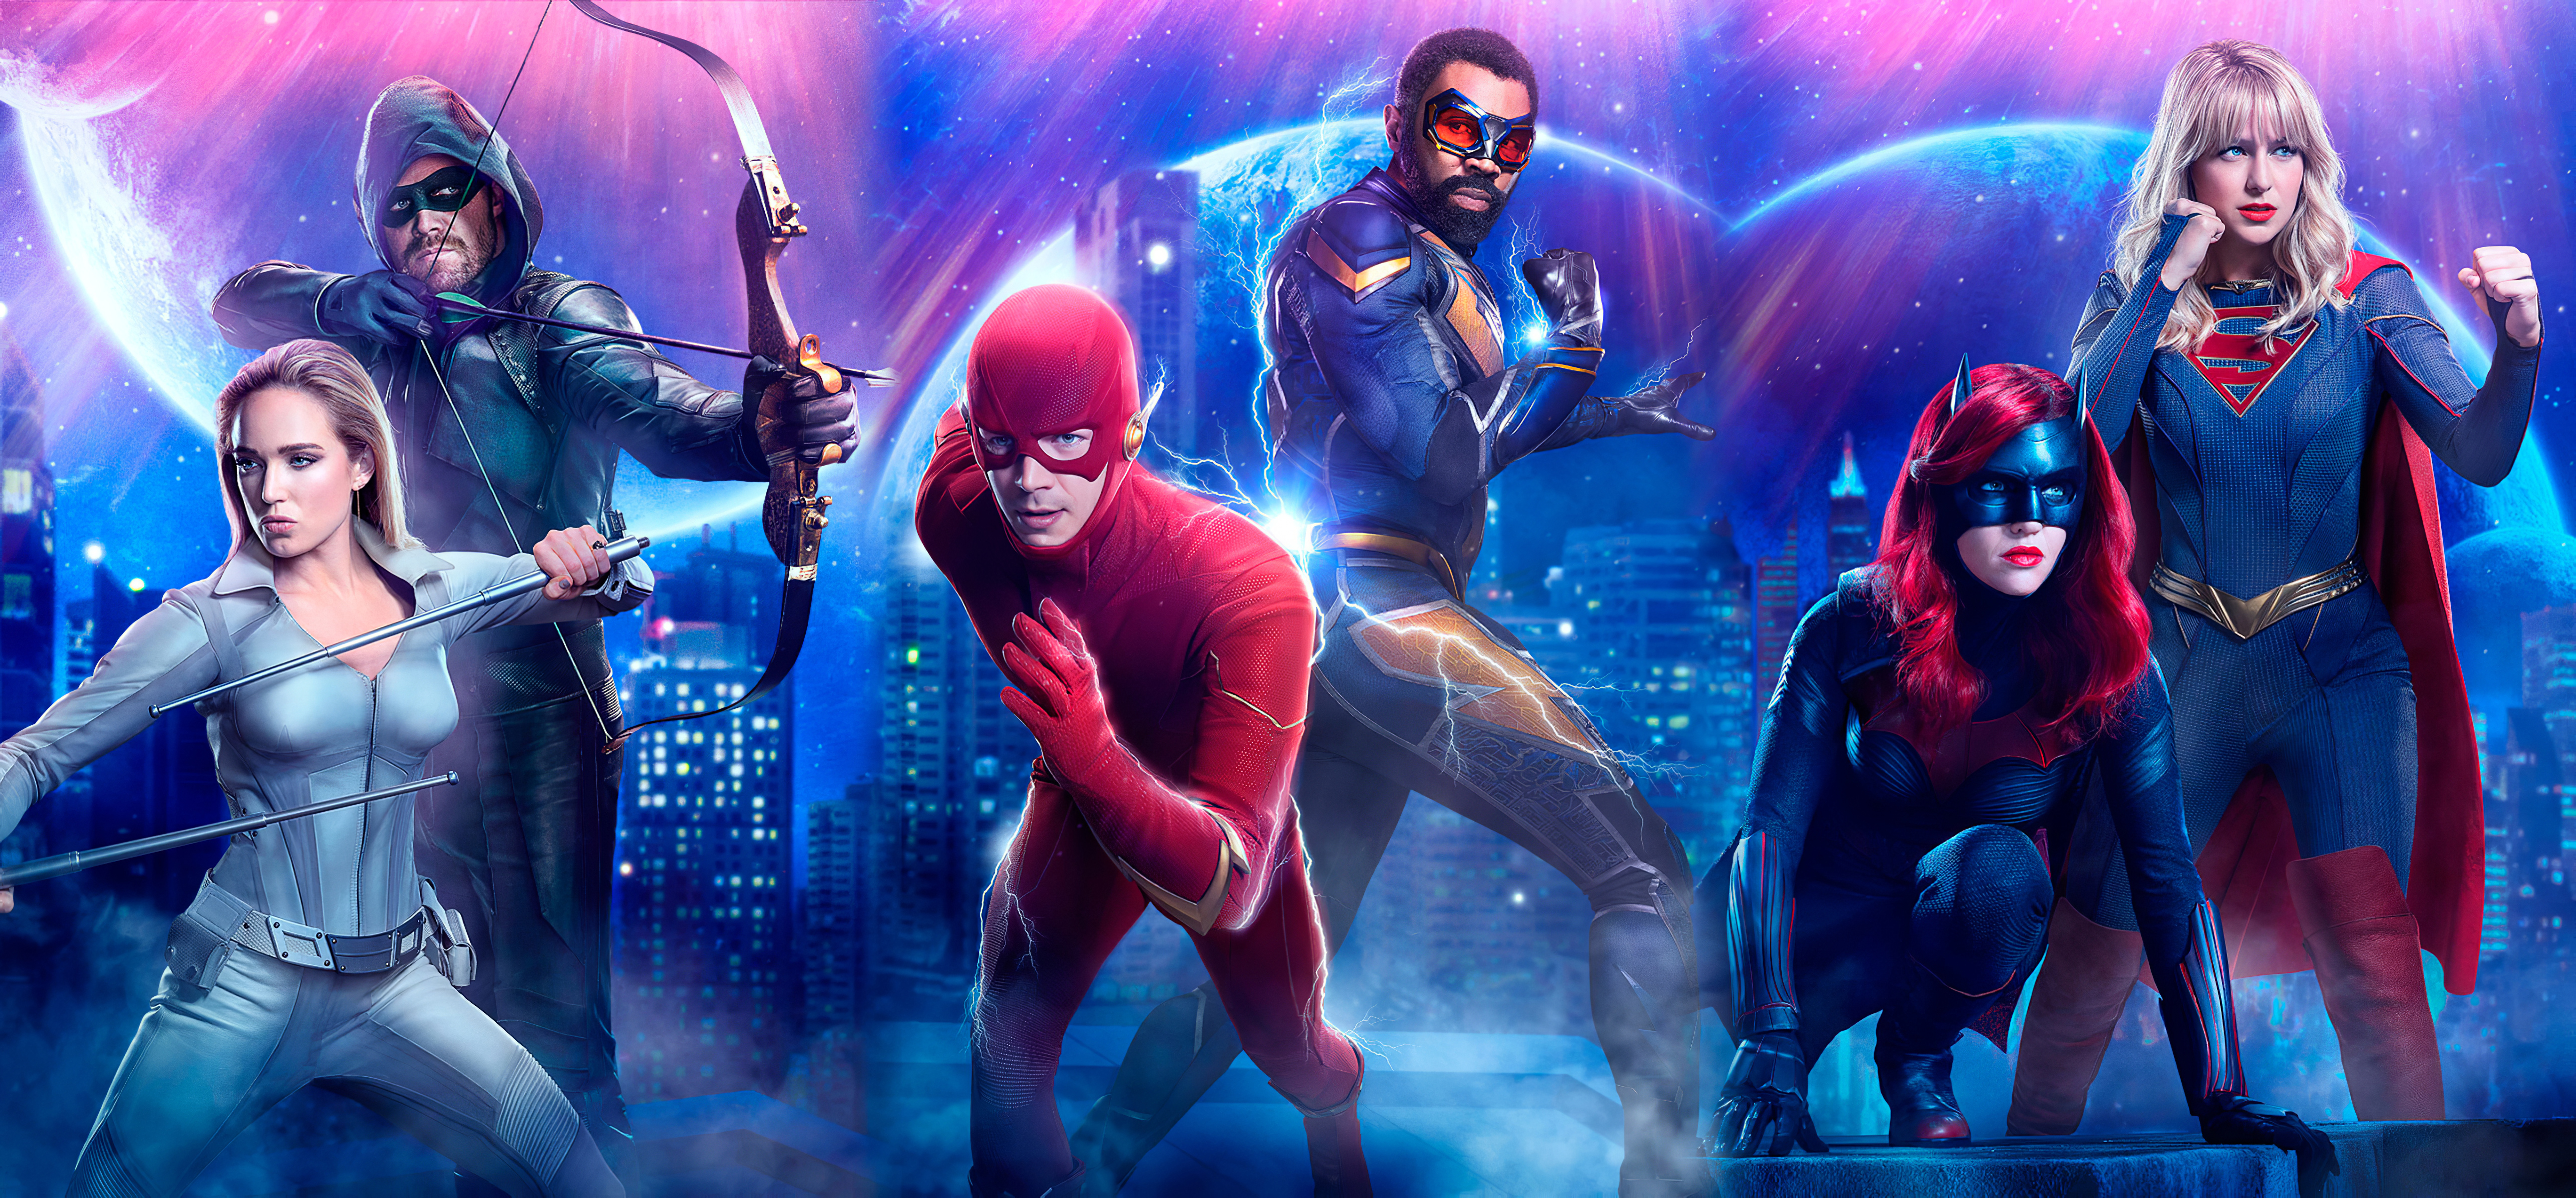 Arrowverse Crossover Event 4k Ultra Hd Wallpaper Background Image 5160x2400 Id 1061980 Wallpaper Abyss 335 overwatch wallpapers (4k) 3840x2160 resolution. arrowverse crossover event 4k ultra hd wallpaper background image 5160x2400 id 1061980 wallpaper abyss